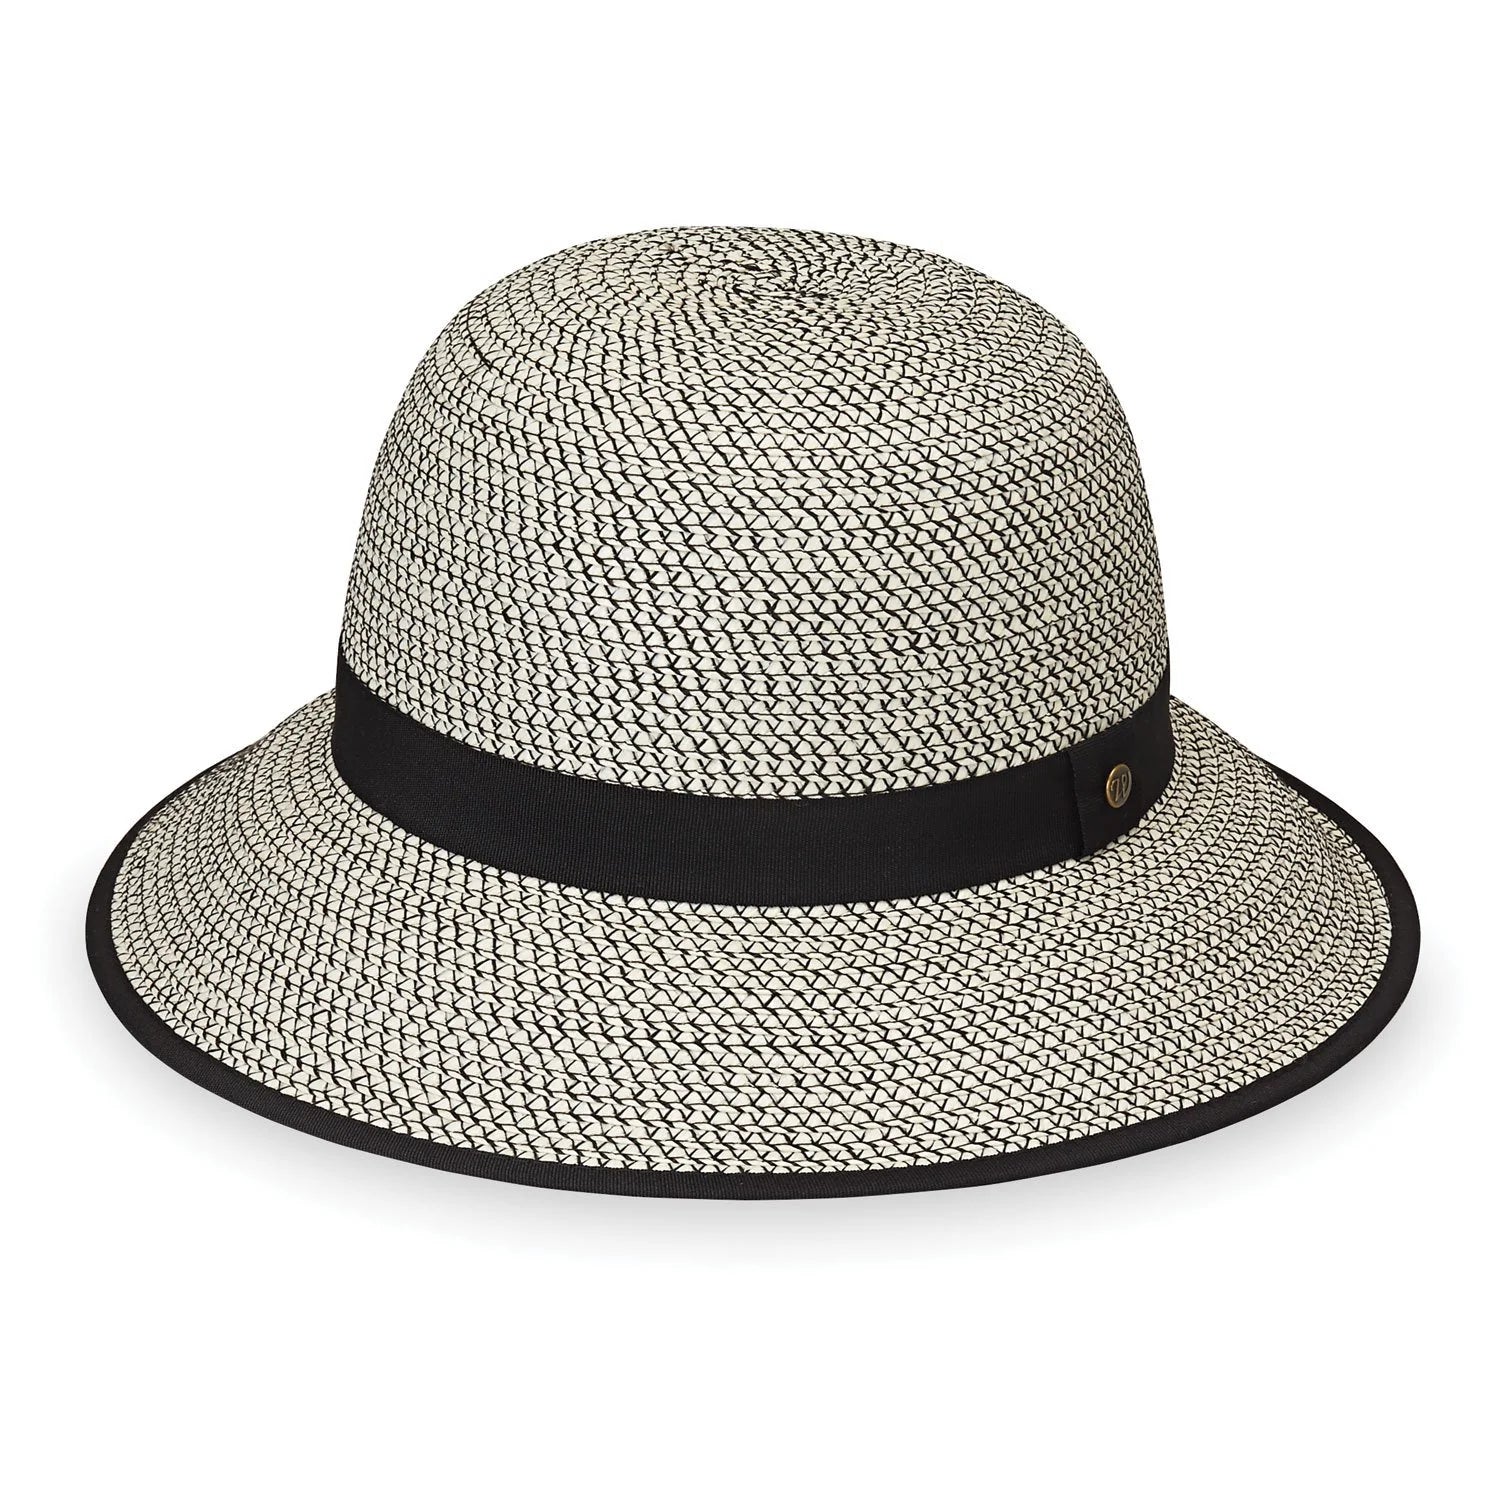 This women's cloche sun hat is an elegant twist on a vintage design with modern flair. The clean lines and neutral tones of the Darby hat elevate your look for shopping with friends or walking barefoot on the beach. Sun protected and timeless.